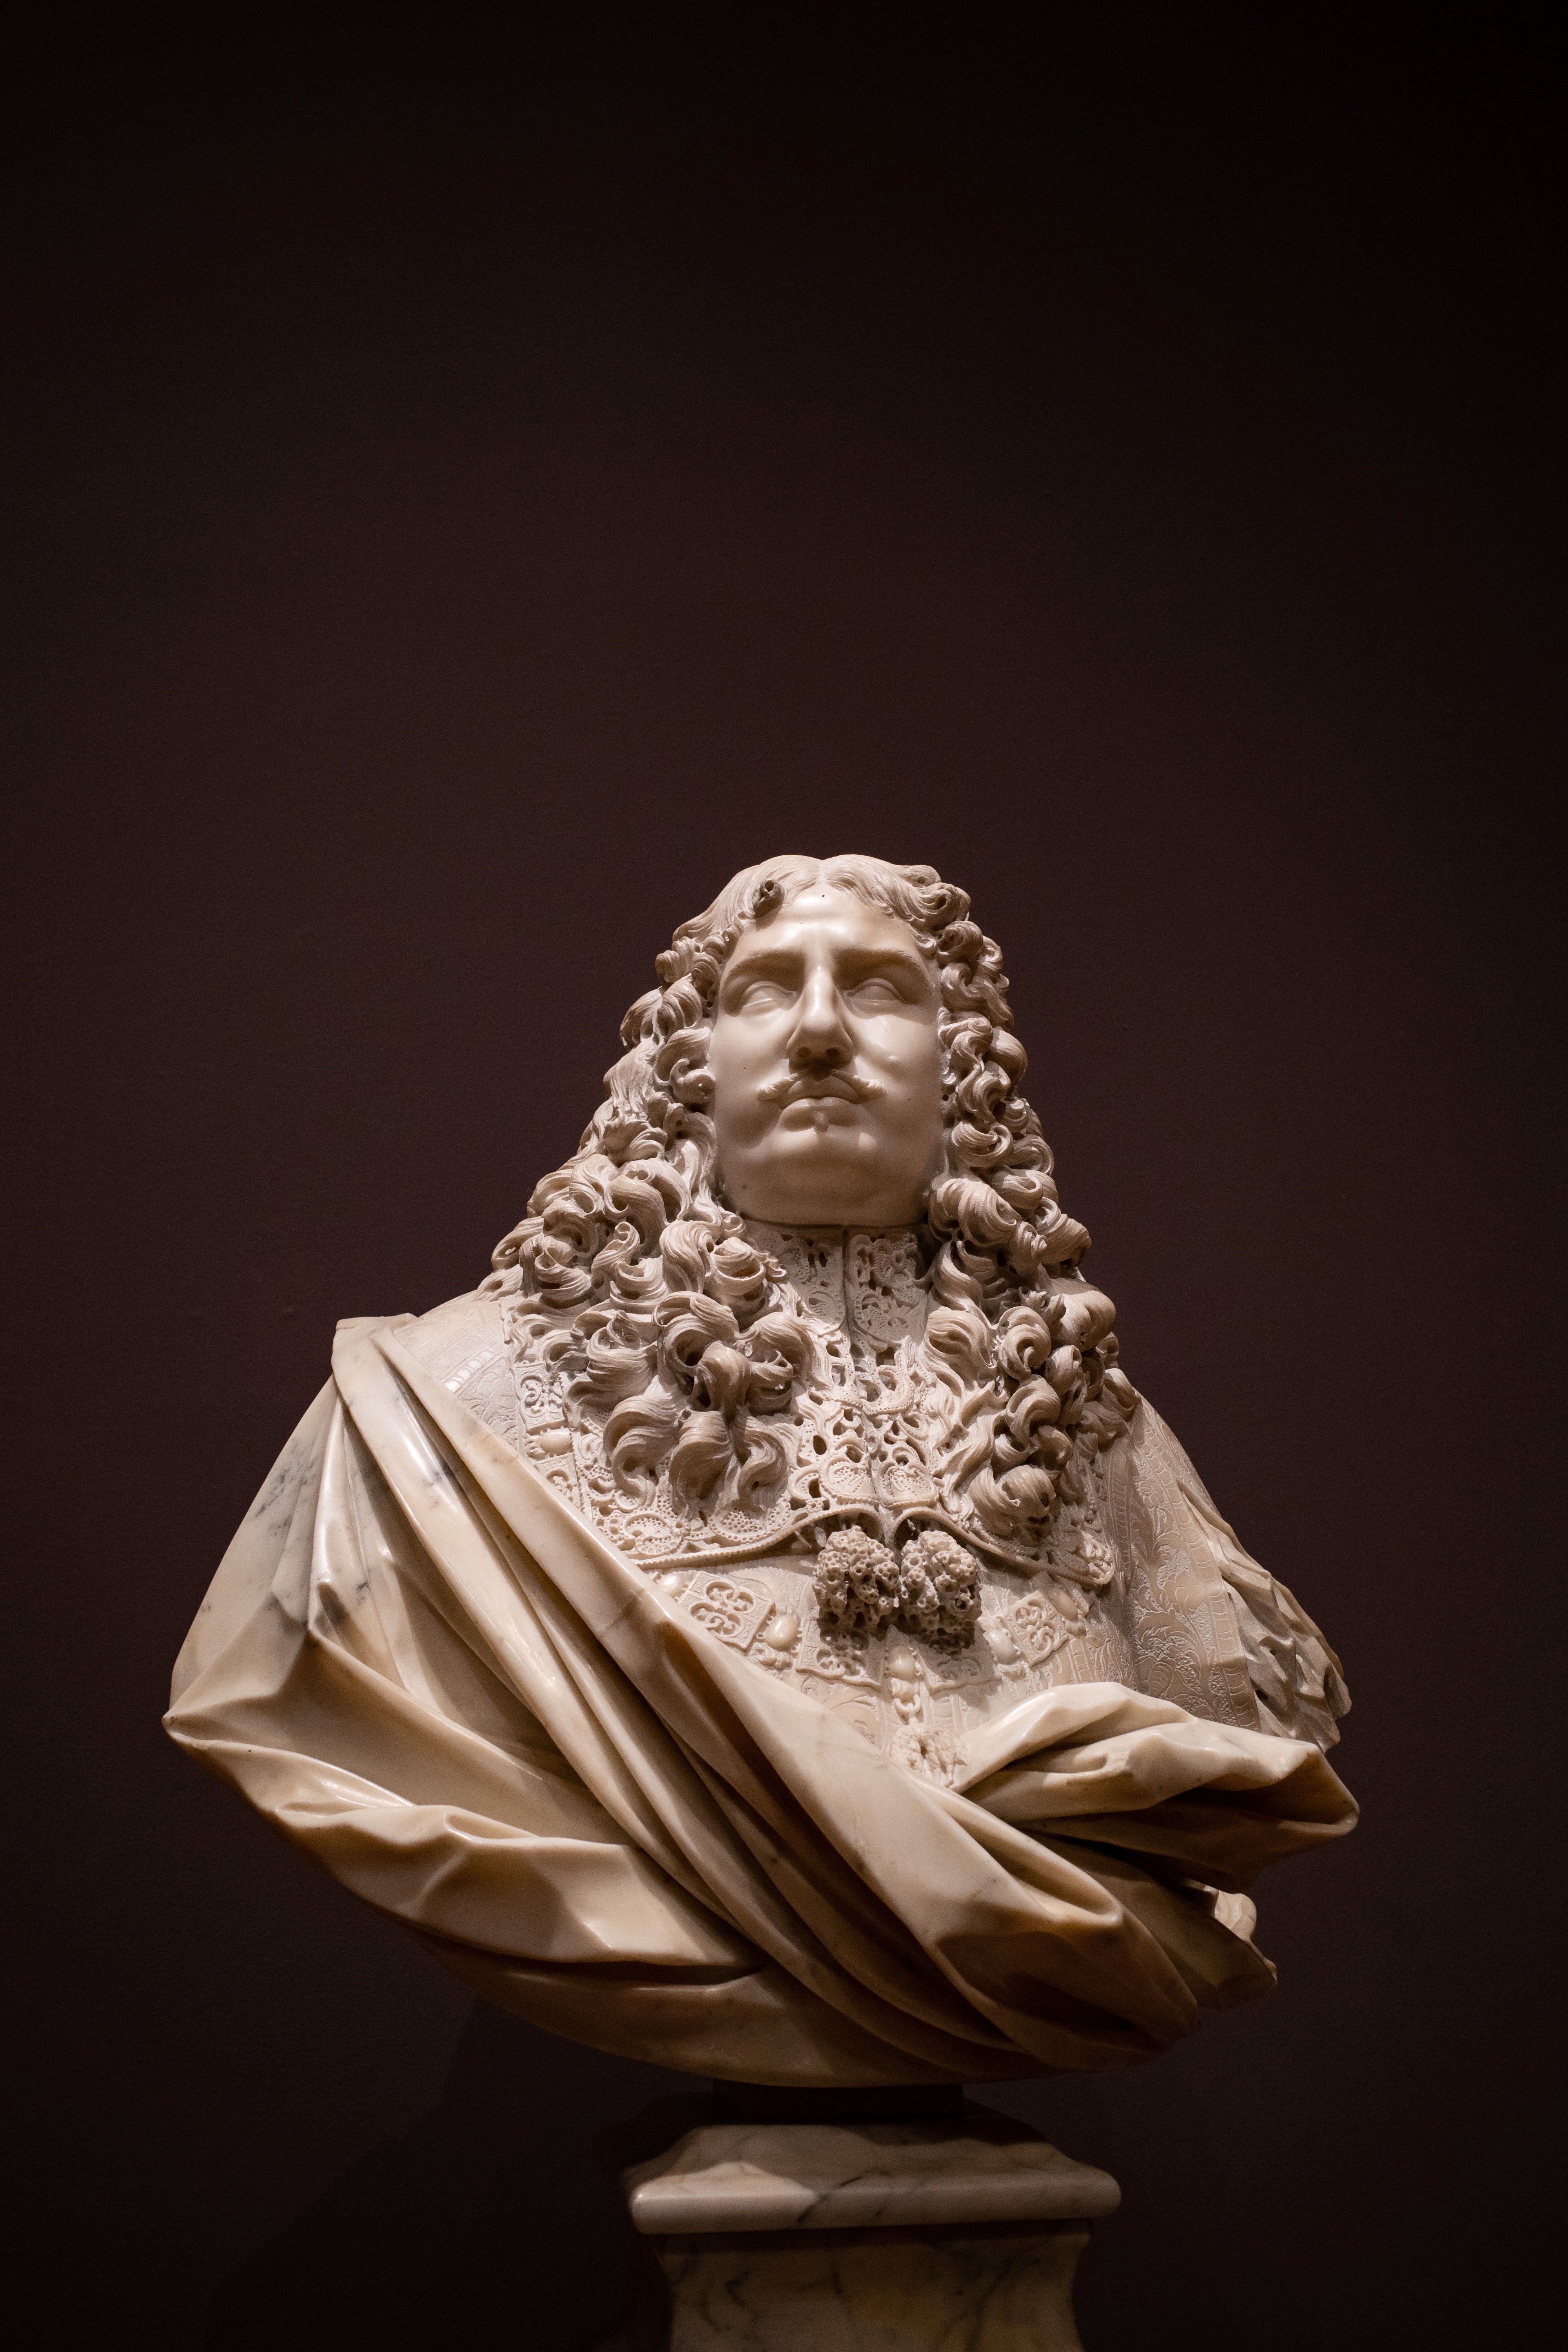 A curly-haired Italian aristocrat sculpted bust